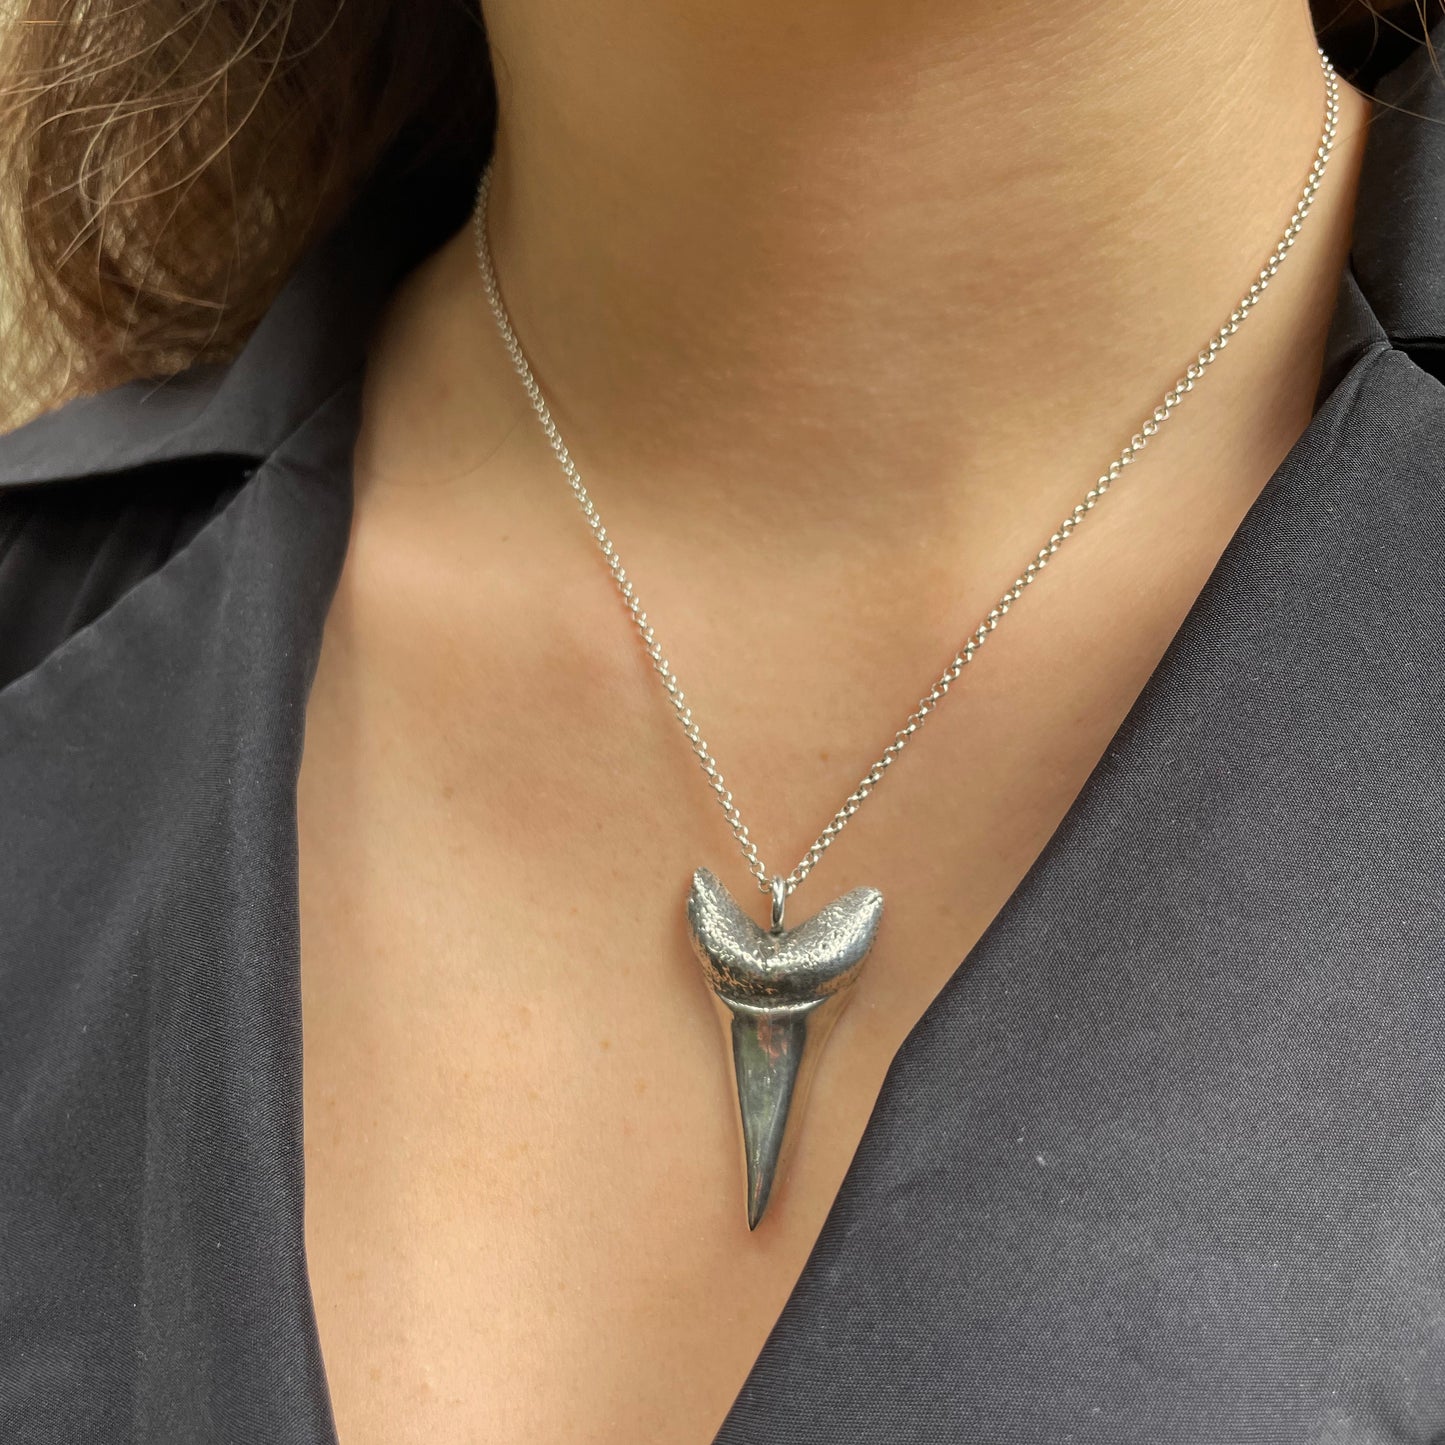 2 1/16 inch Fossilized Megalodon Shark Tooth Necklace featuring Black –  Real Shark Tooth Necklaces